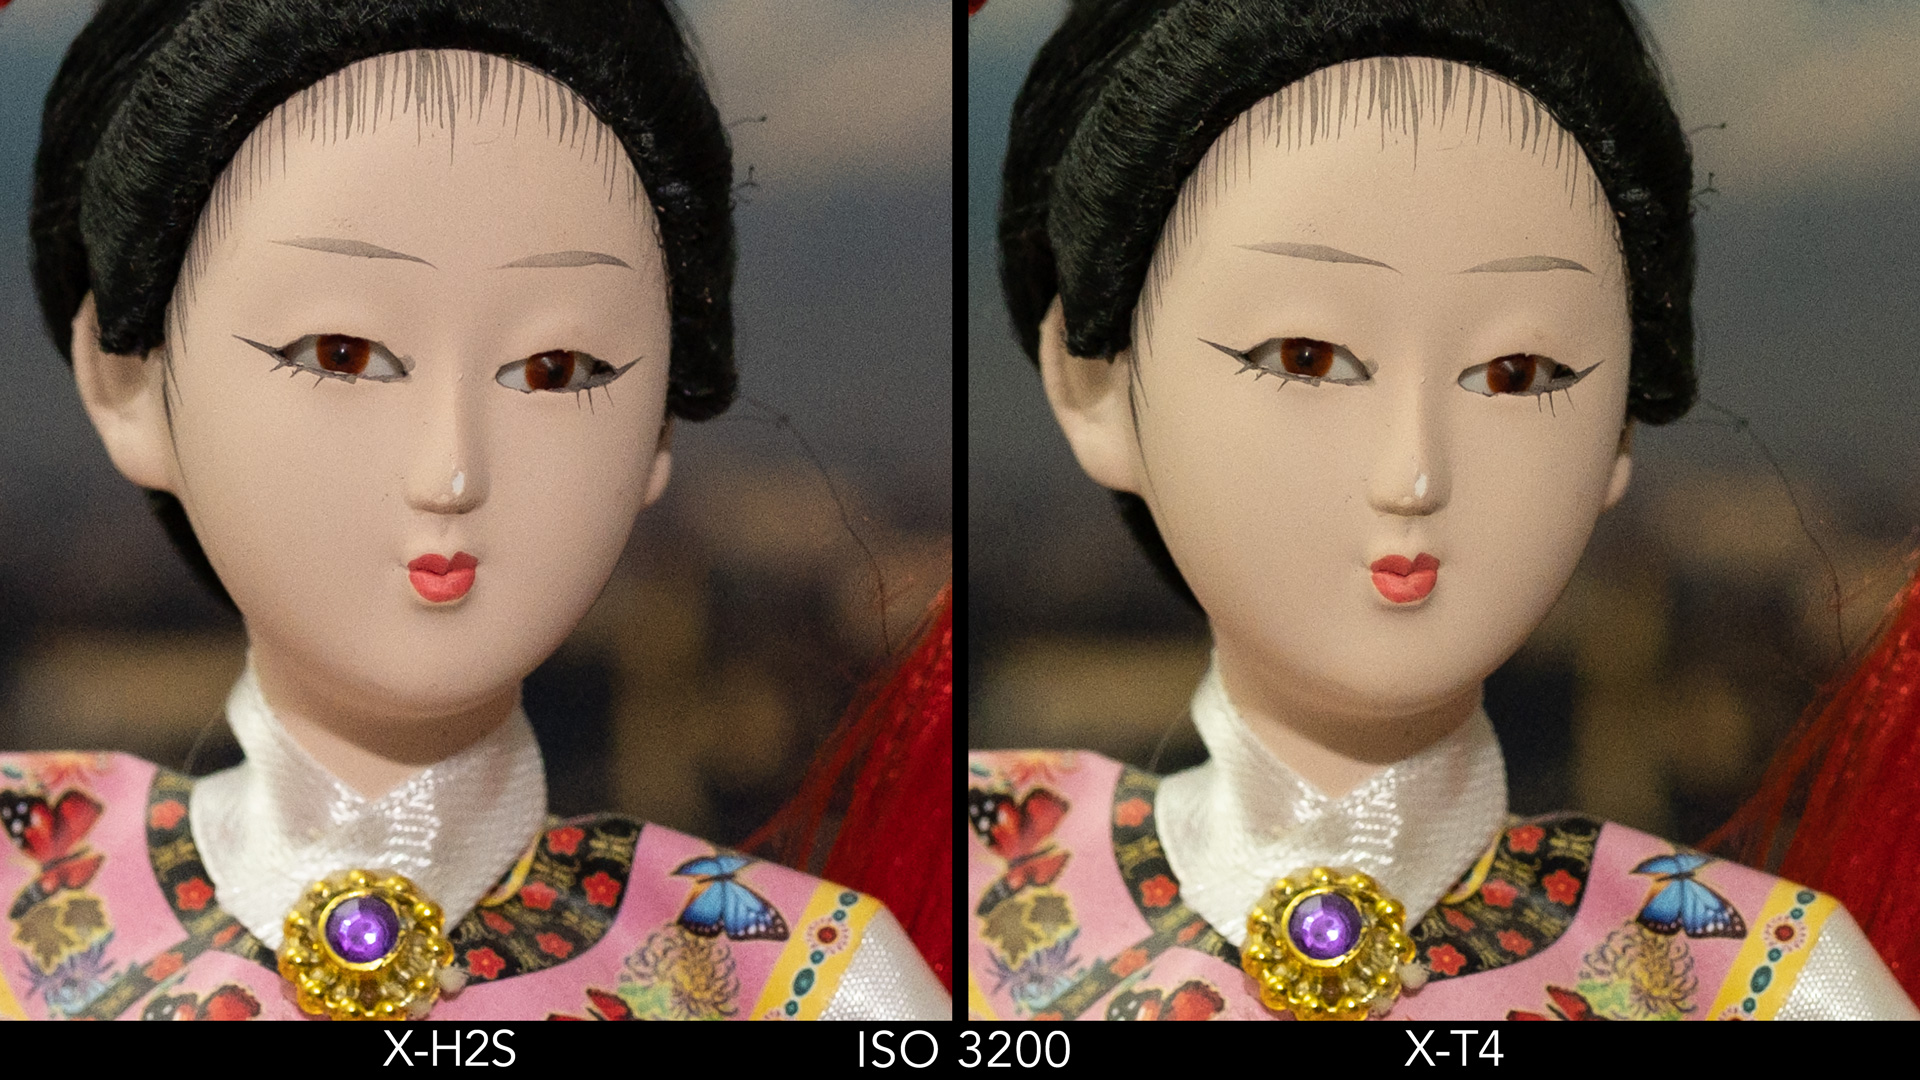 Side by side crop of the Japanese doll, showing the quality at ISO 3200 for the X-H2S and X-T4